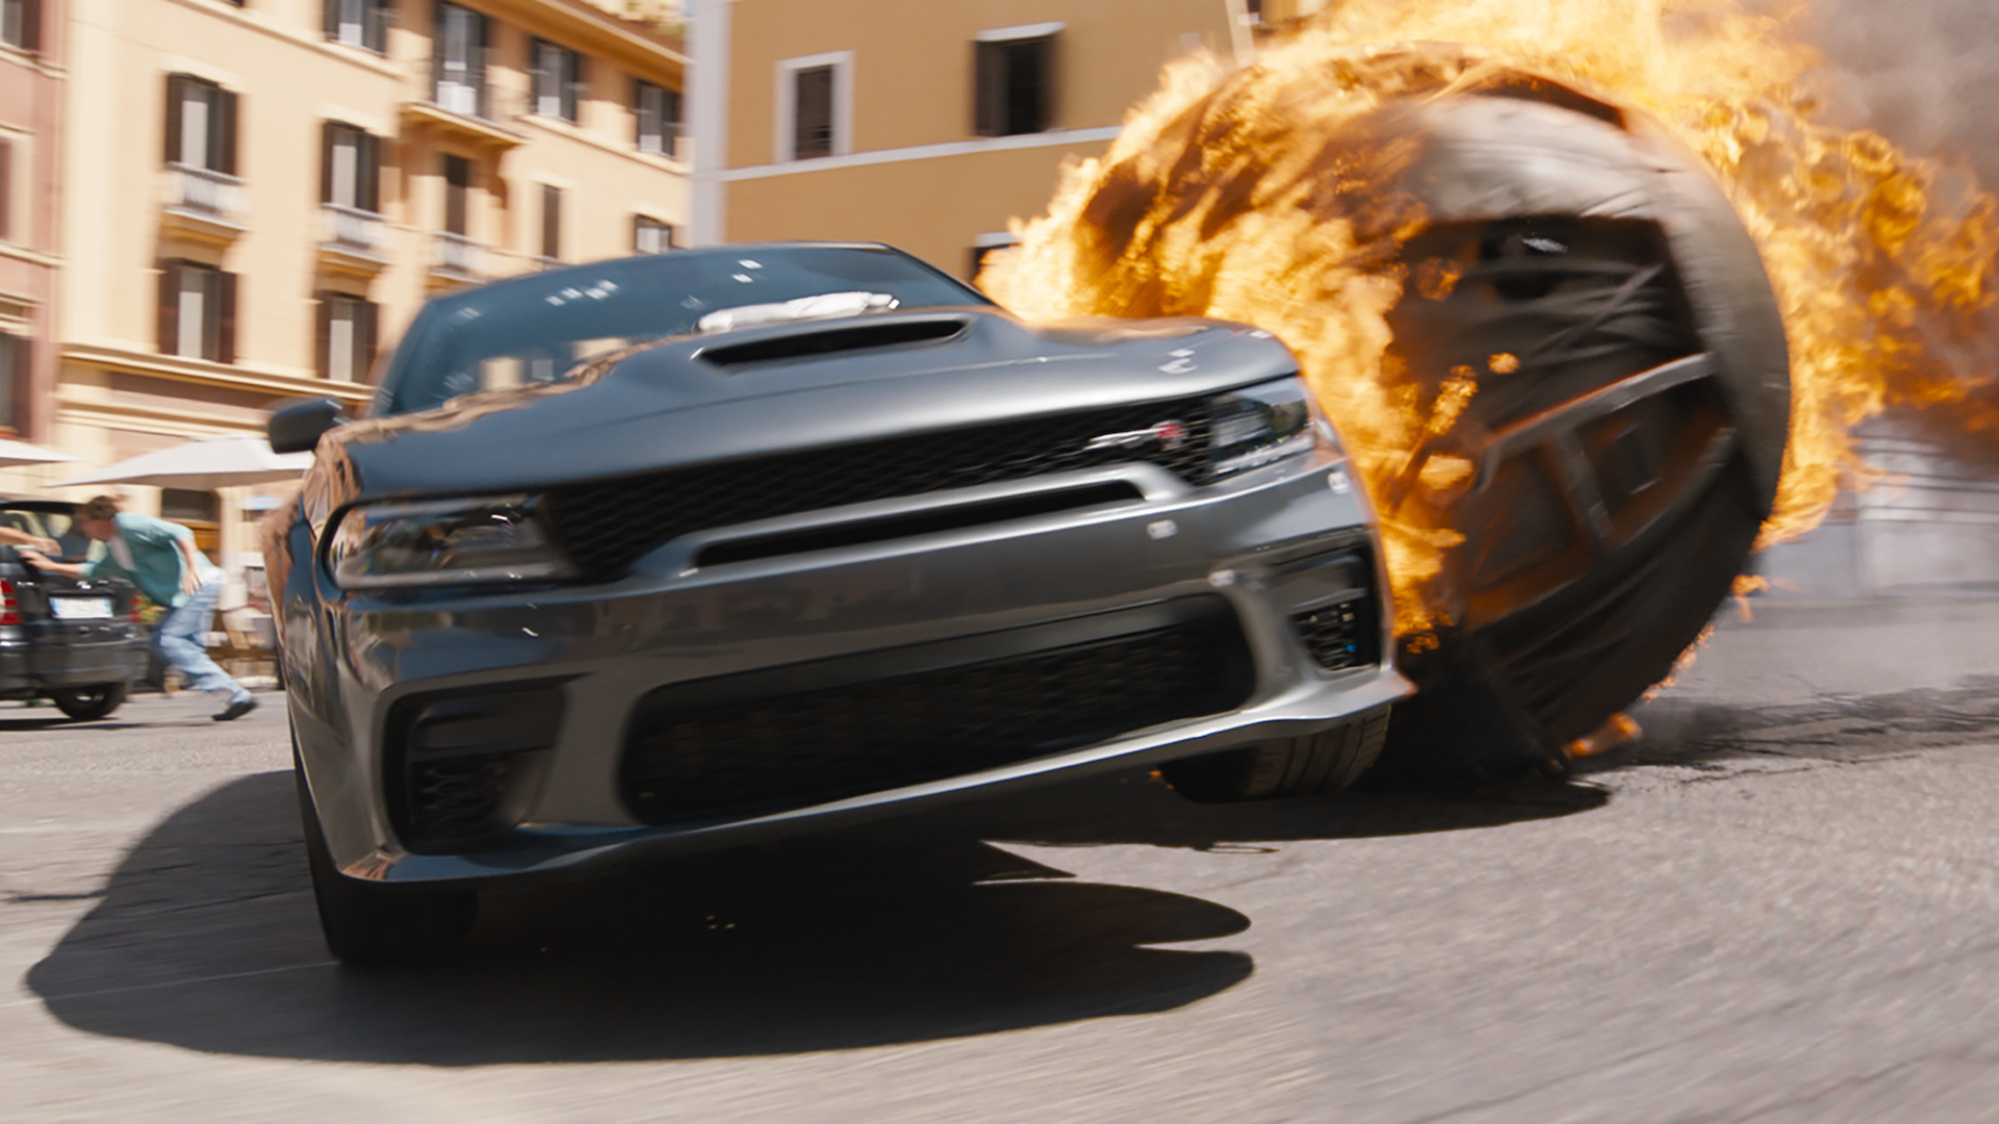 A giant spherical bomb hits a car in Rome in "Fast X."